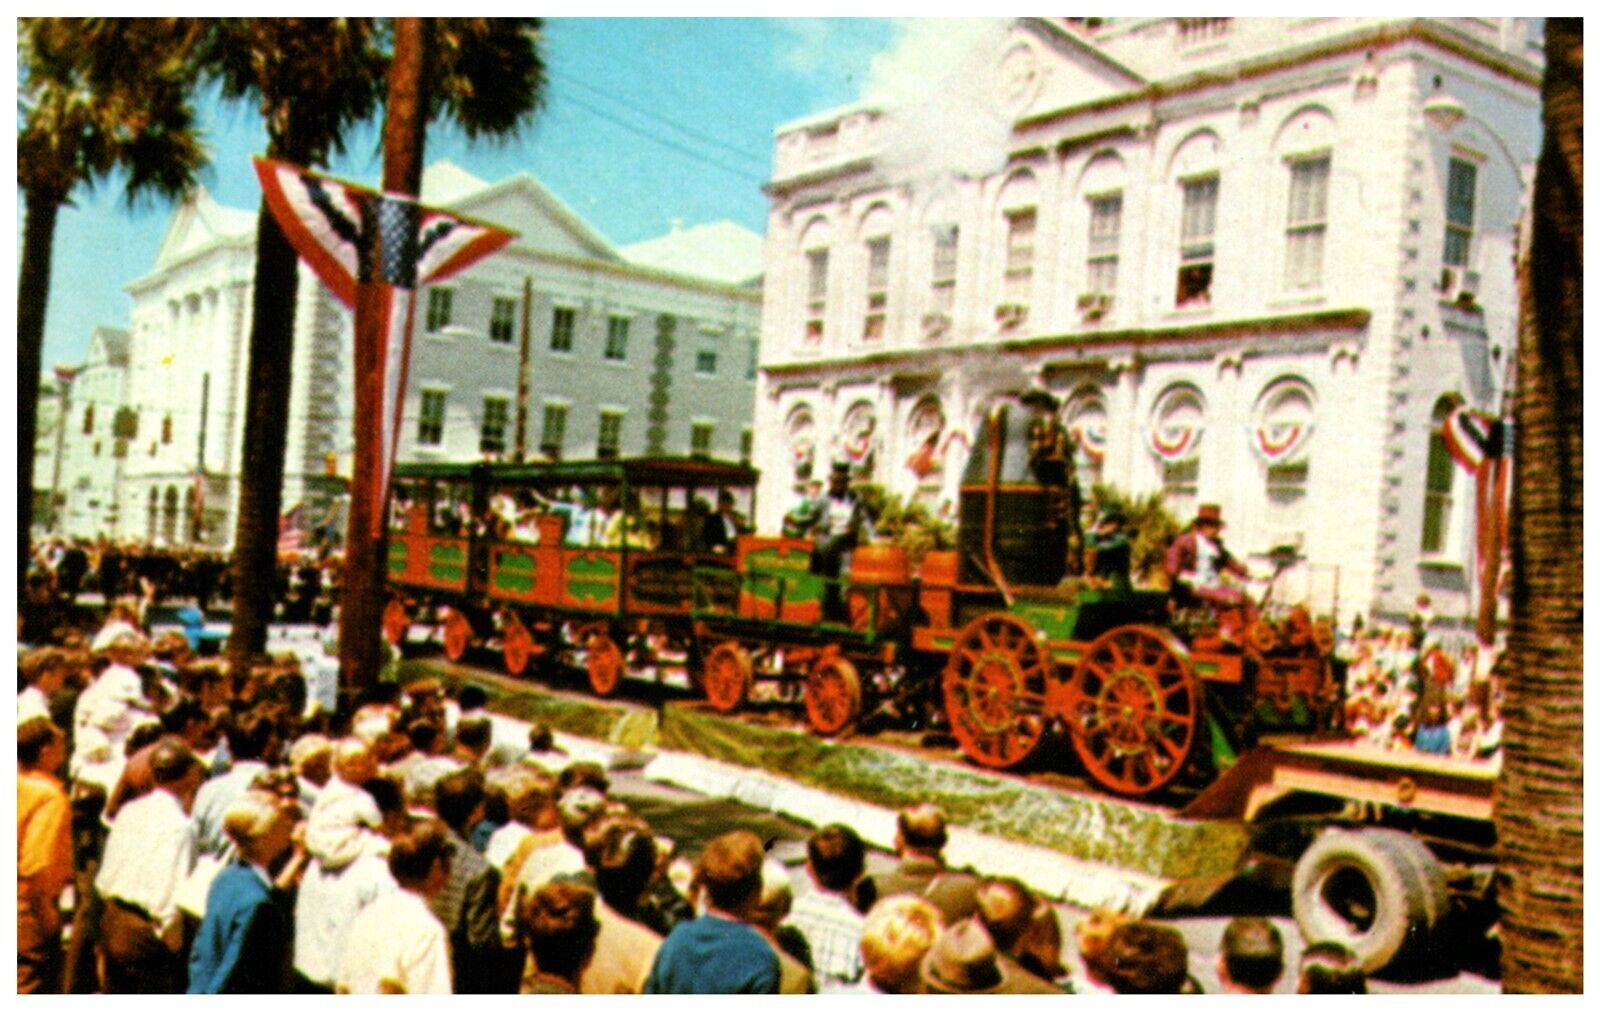 Railroad Train Best Fried of Charleston at Tricentennial Parade 1970